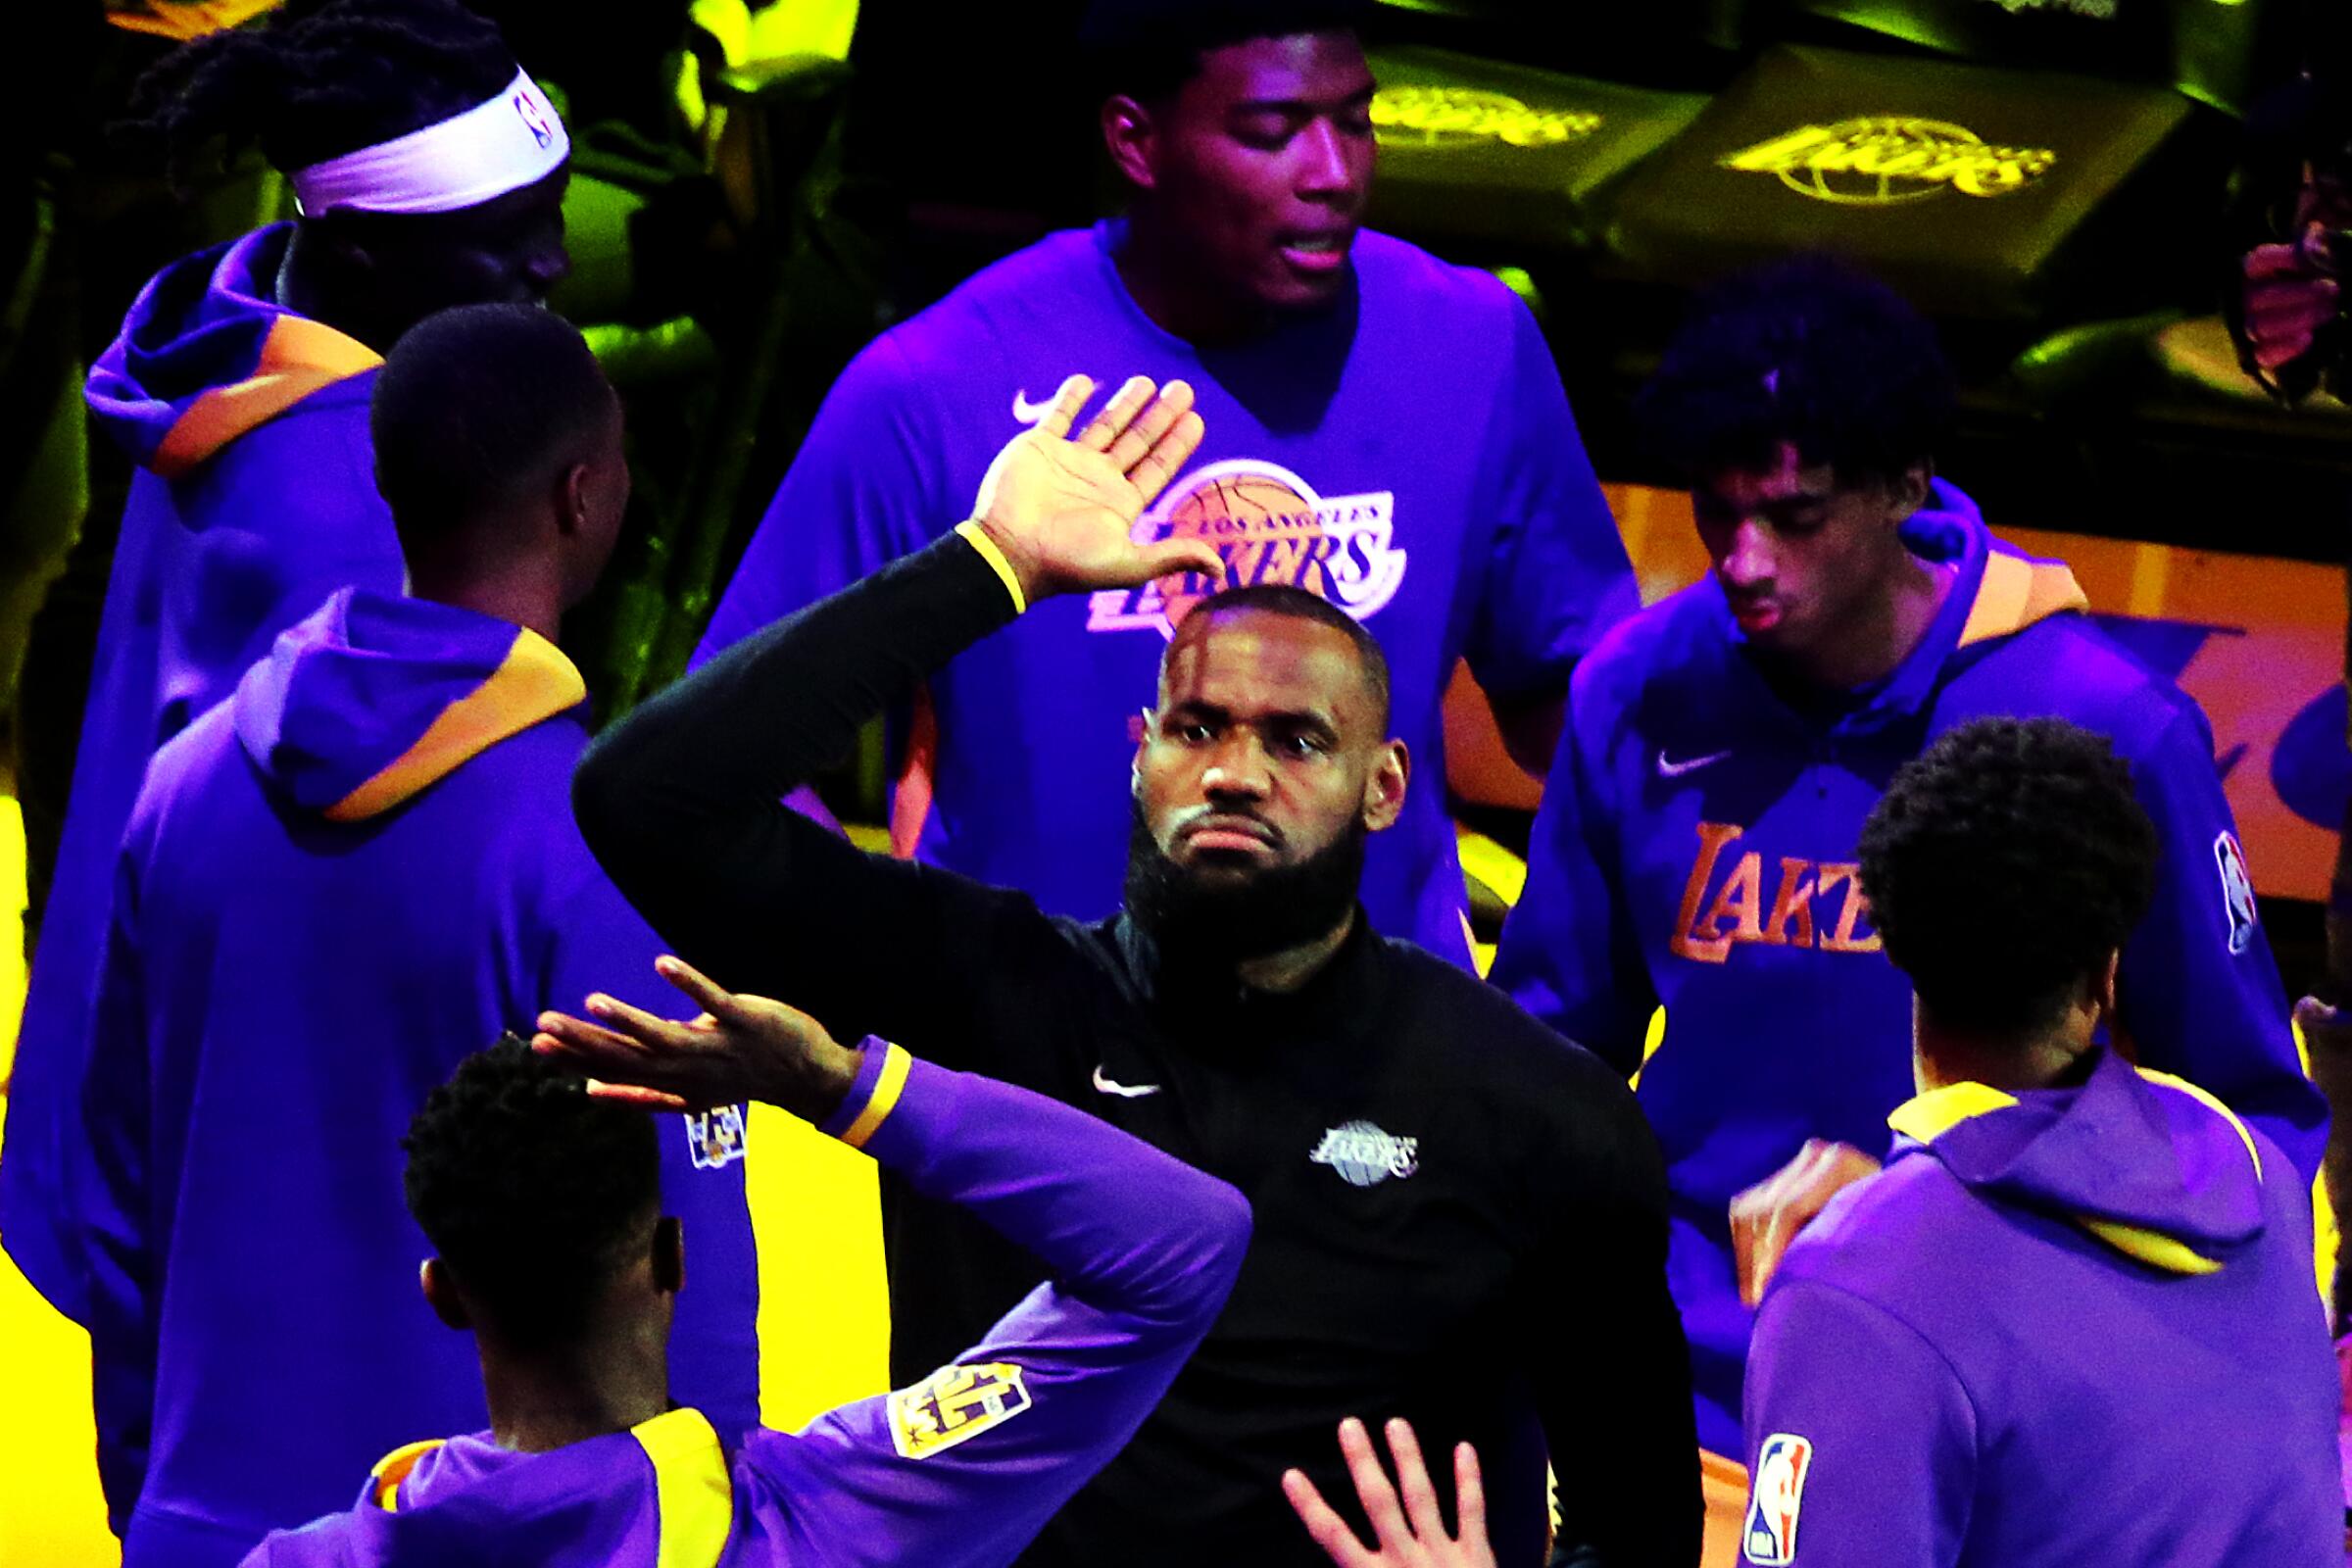 LeBron James: Lakers release first pic of the King in purple-and